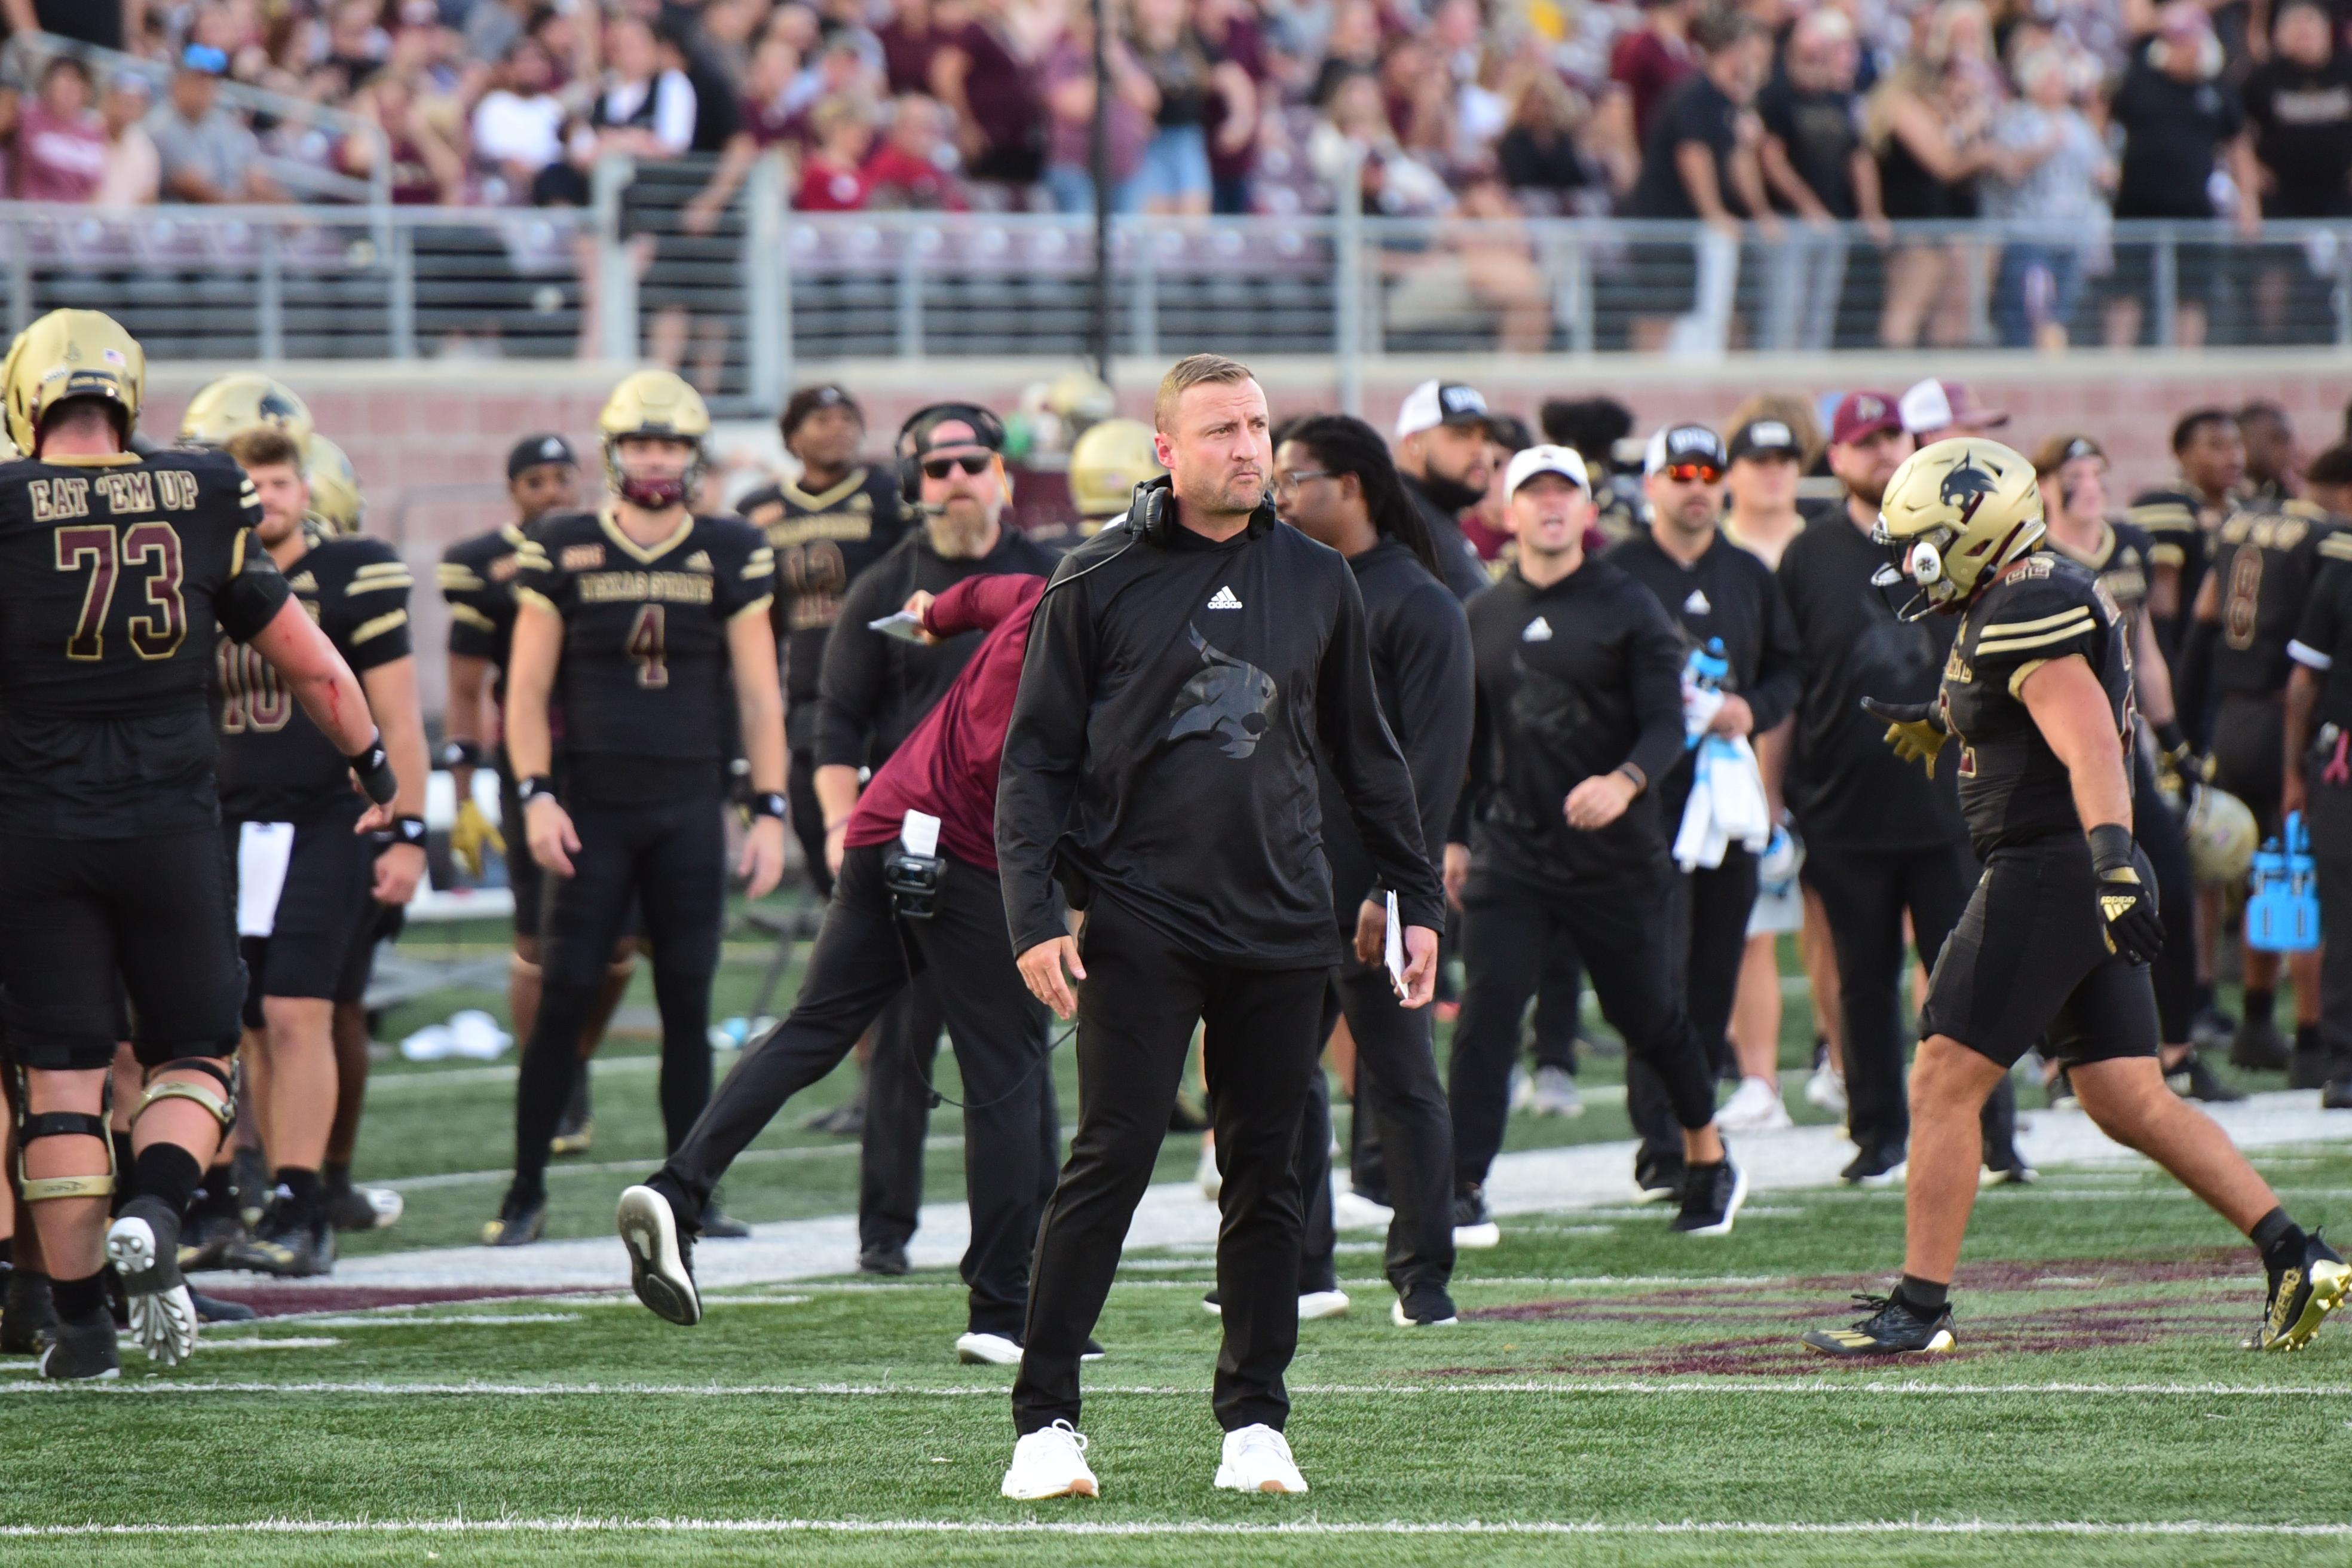 Developing Texas State Parts Ways With Head Coach Jake Spavital San Marcos Record 5268